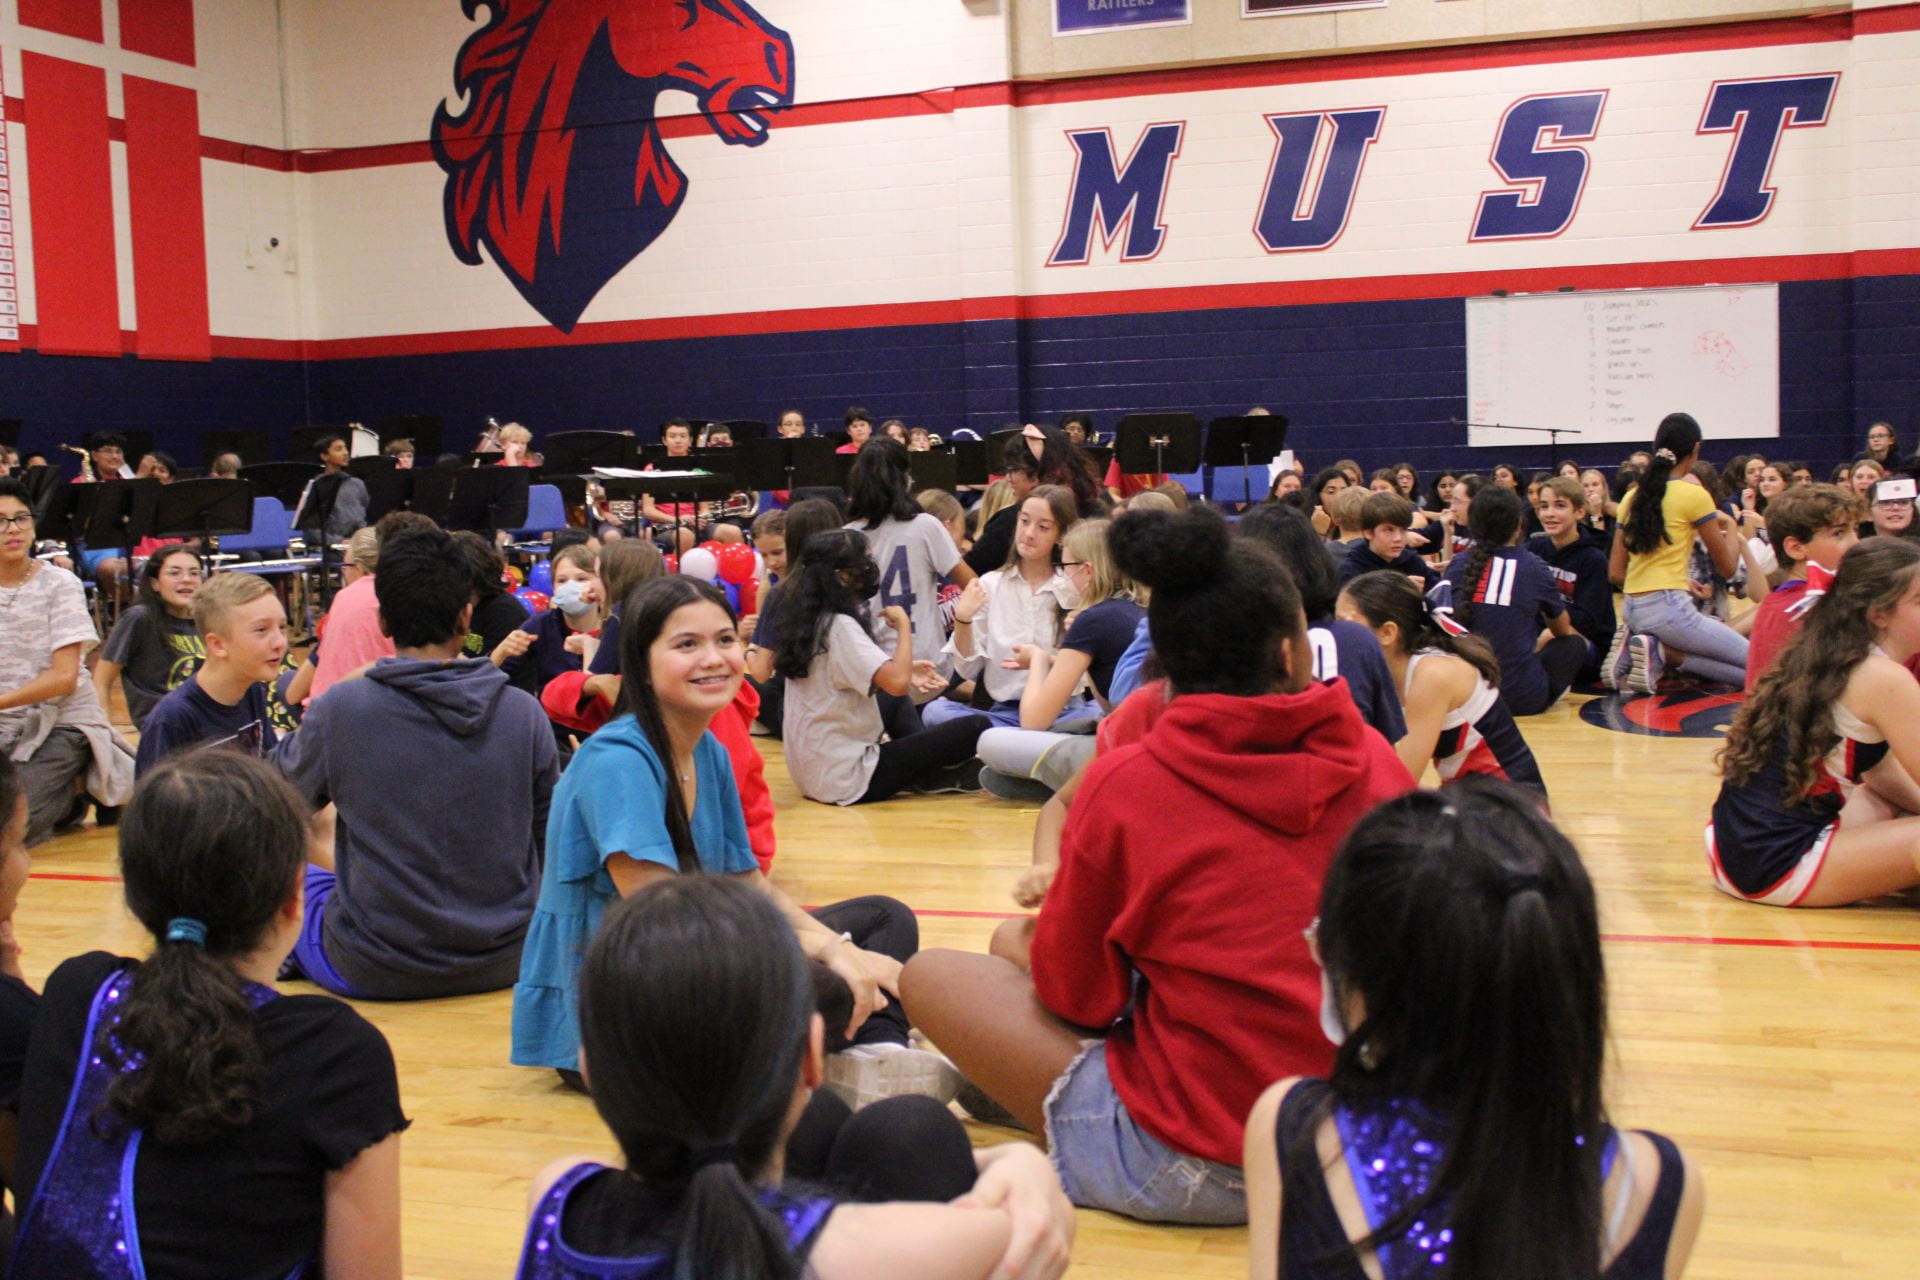 Students in the gym at Canyon Vista Middle School